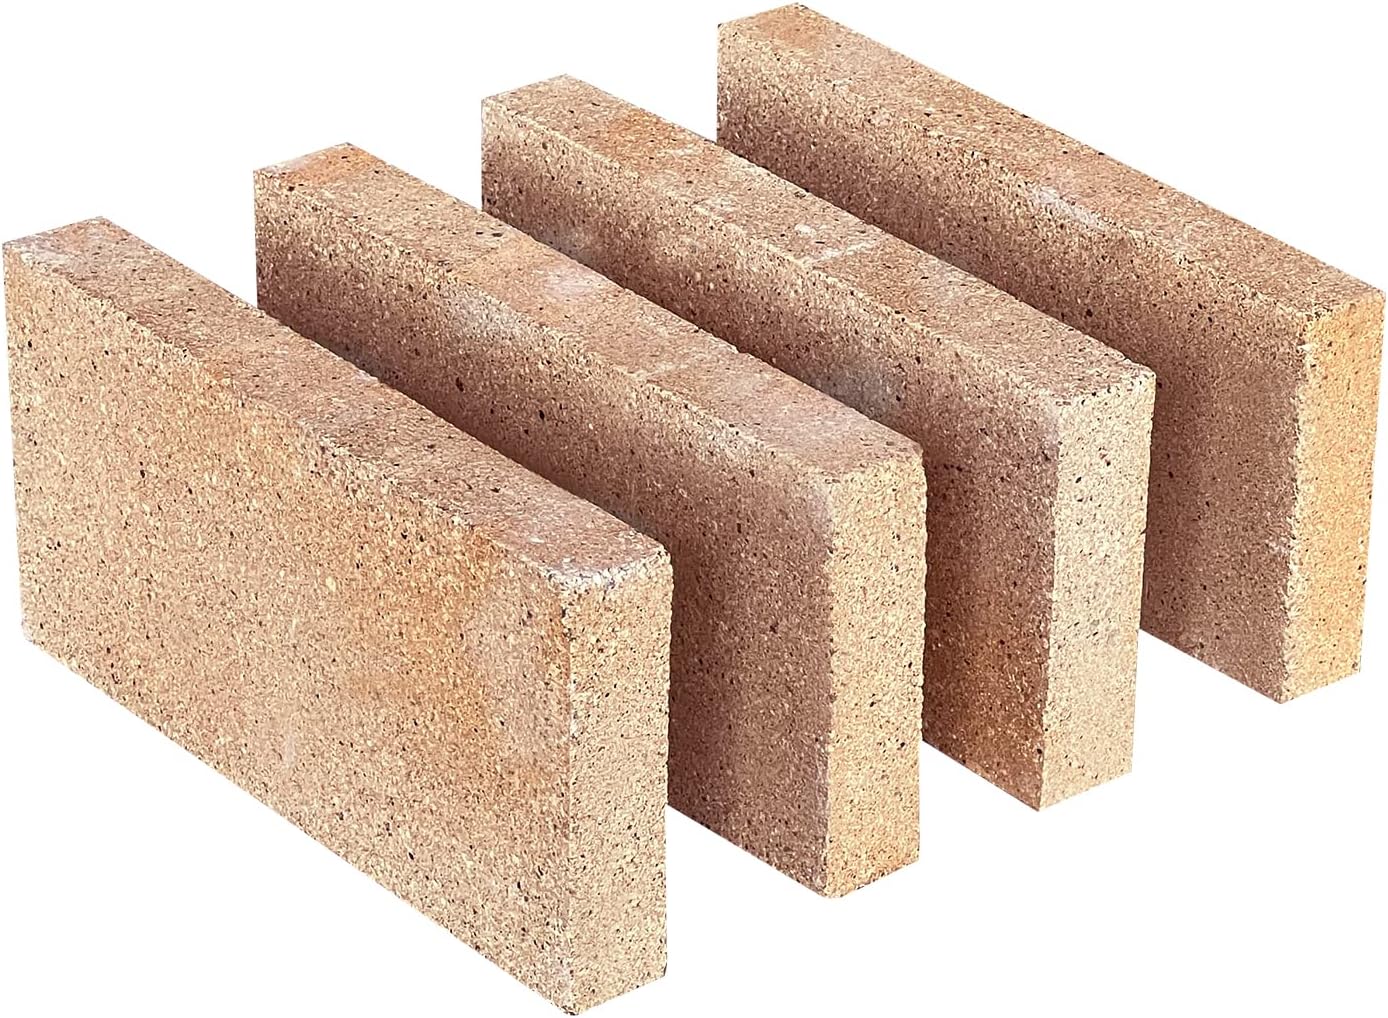 Insulating Fire Bricks 2500F 0.75 inch x 4.5 inch x 9 inch IFB Box of 6 Fire Bricks for Fireplaces, Pizza Ovens, Kilns, Forges